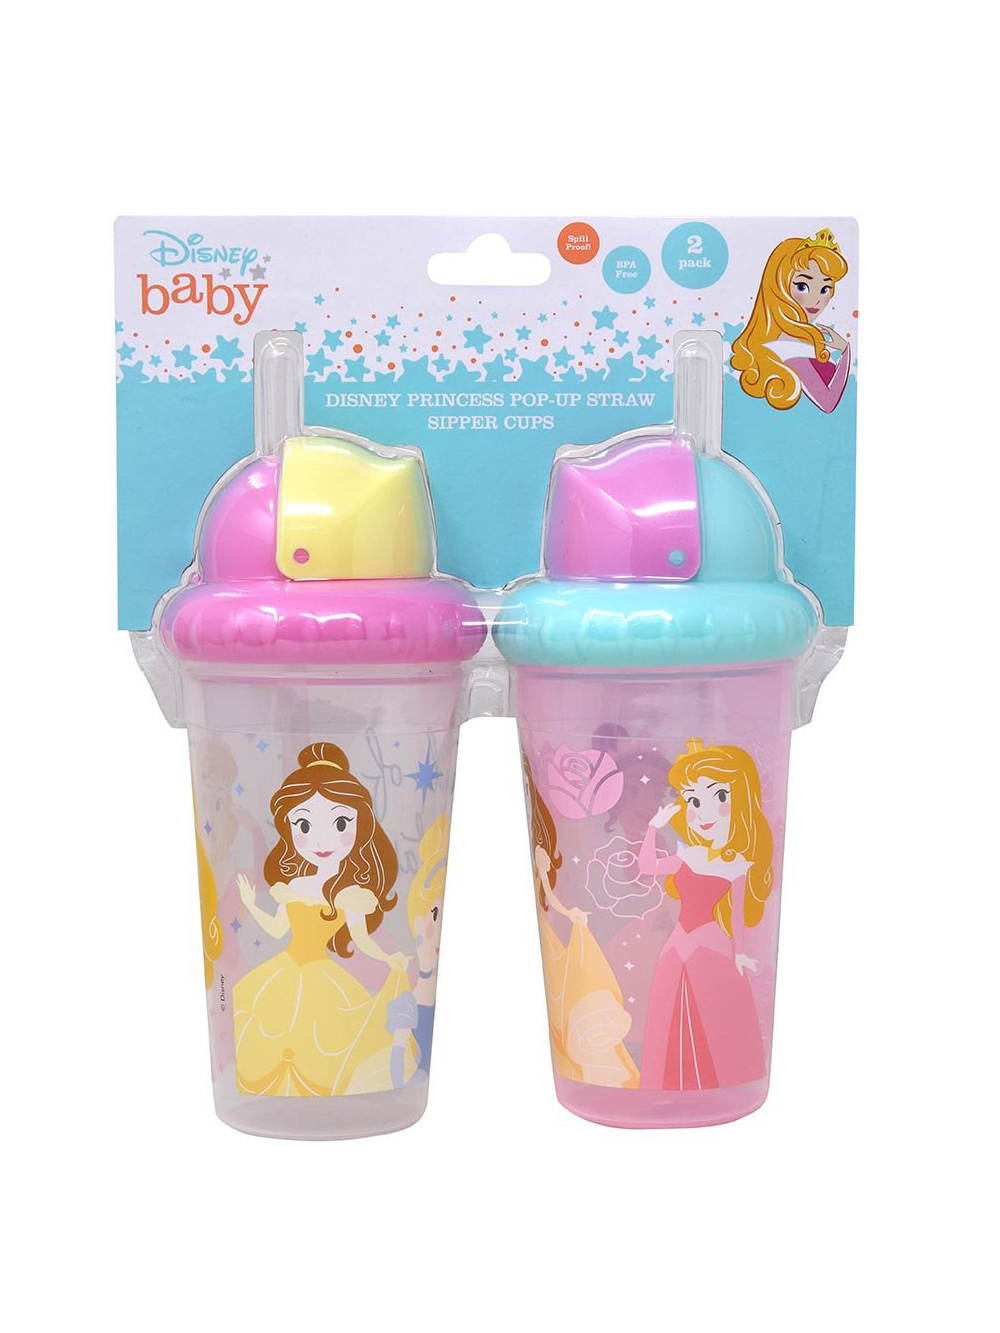 Disney Minnie Mouse 2-Pack Pop Up Straw Infants Sippy Cup